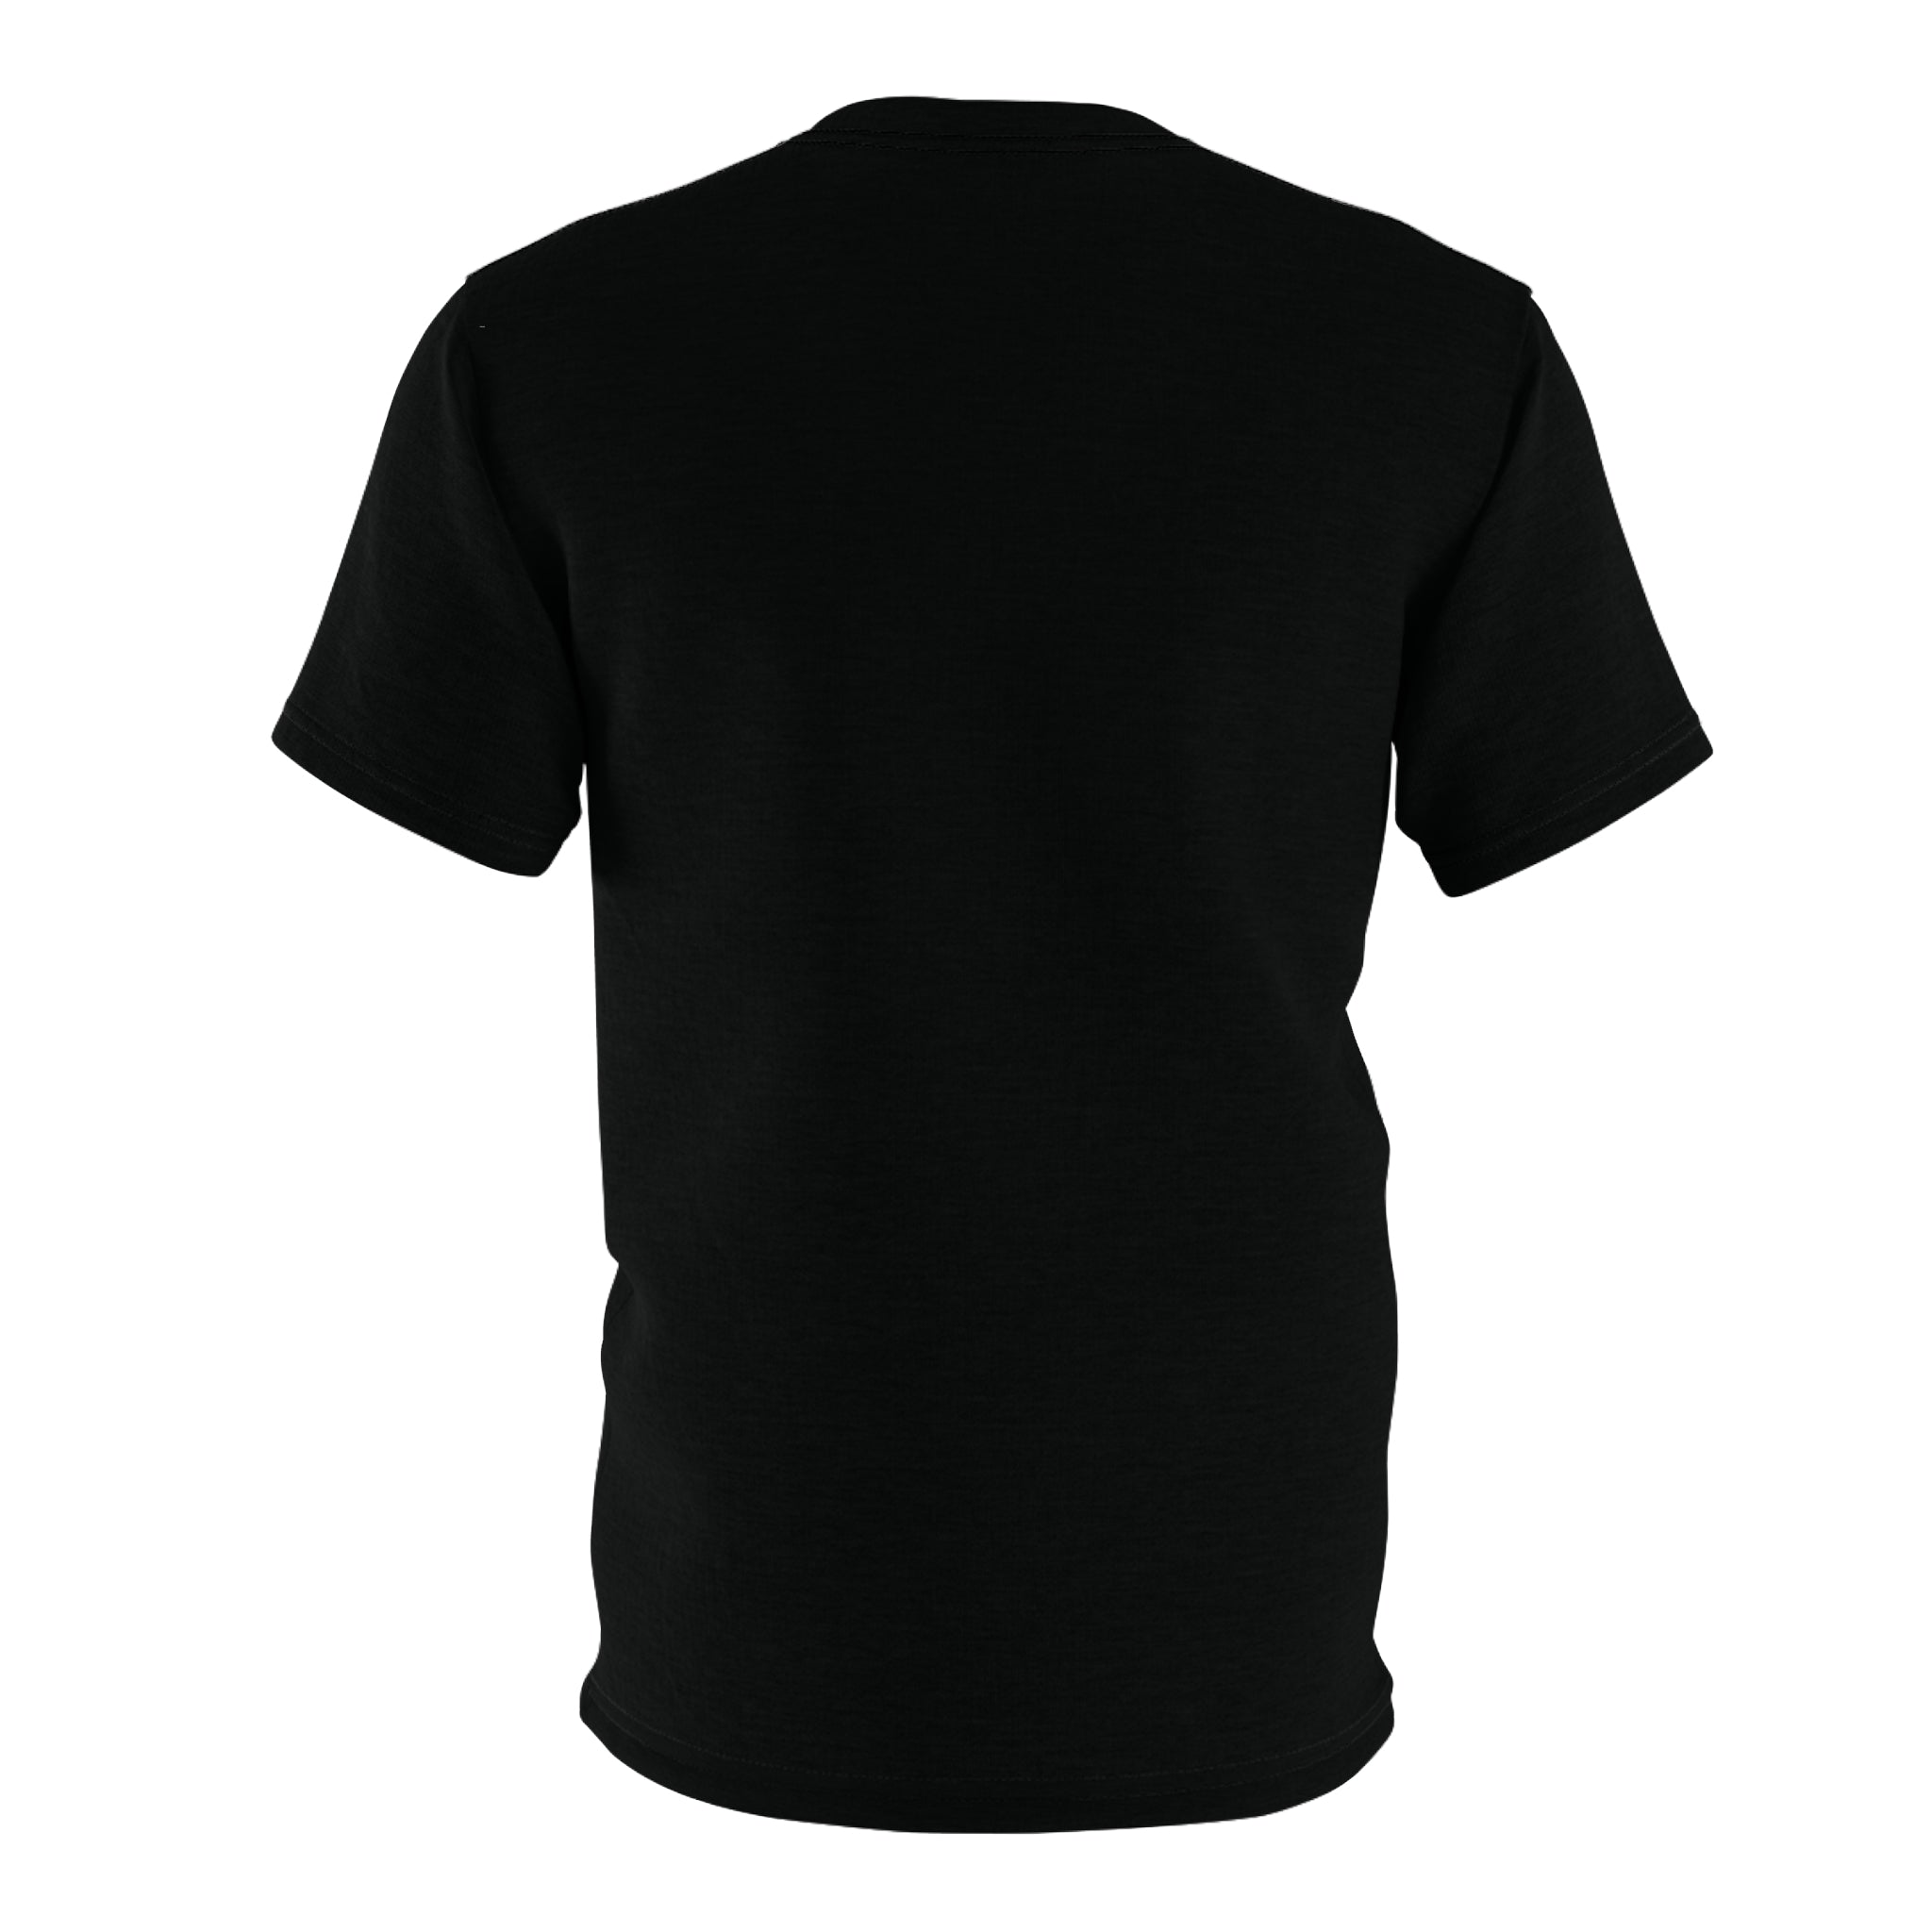 "Cool Stoner Vibes: Green Leaf 'Coolest People' Black Tee With Treesrus2 Logo" - TRU2 Clothing